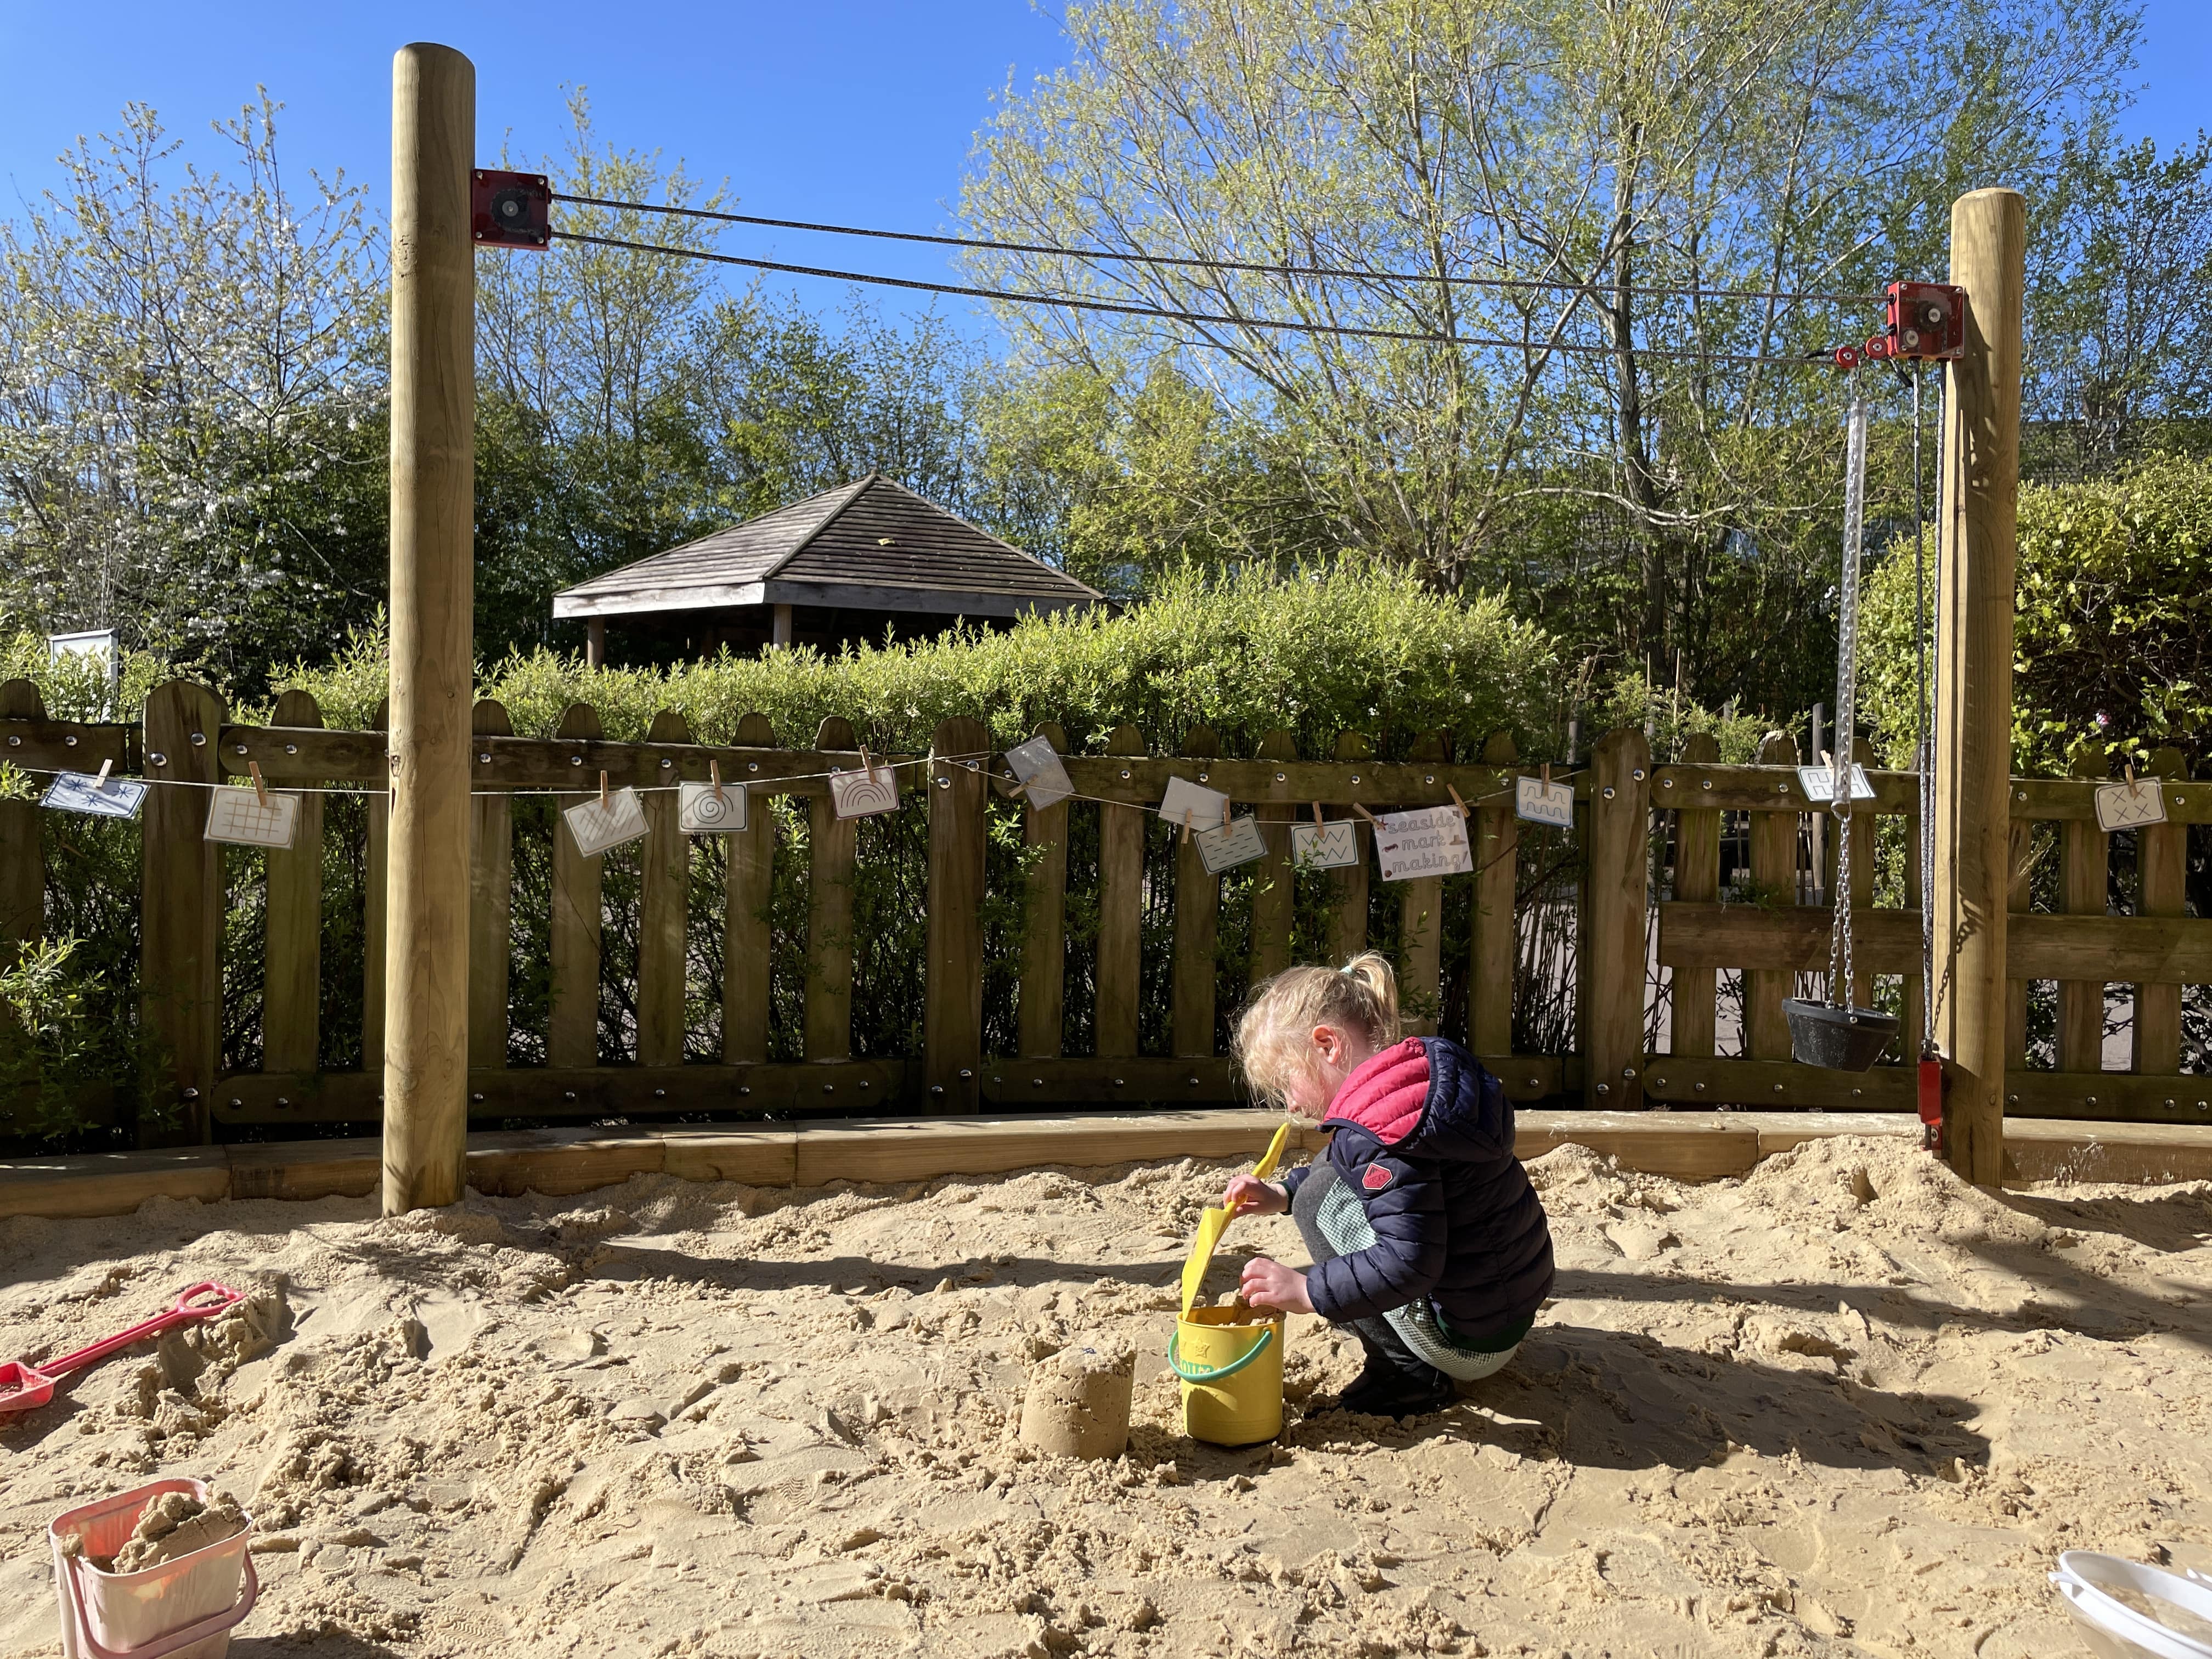 A little girl is in a sandpit with a plastic shovel and bucket, building sandcastles. Behind her is the rope and pulley play equipment, which is two wooden poles that are connected by rope and have a pulley attached, allowing buckets to be transported between the two.